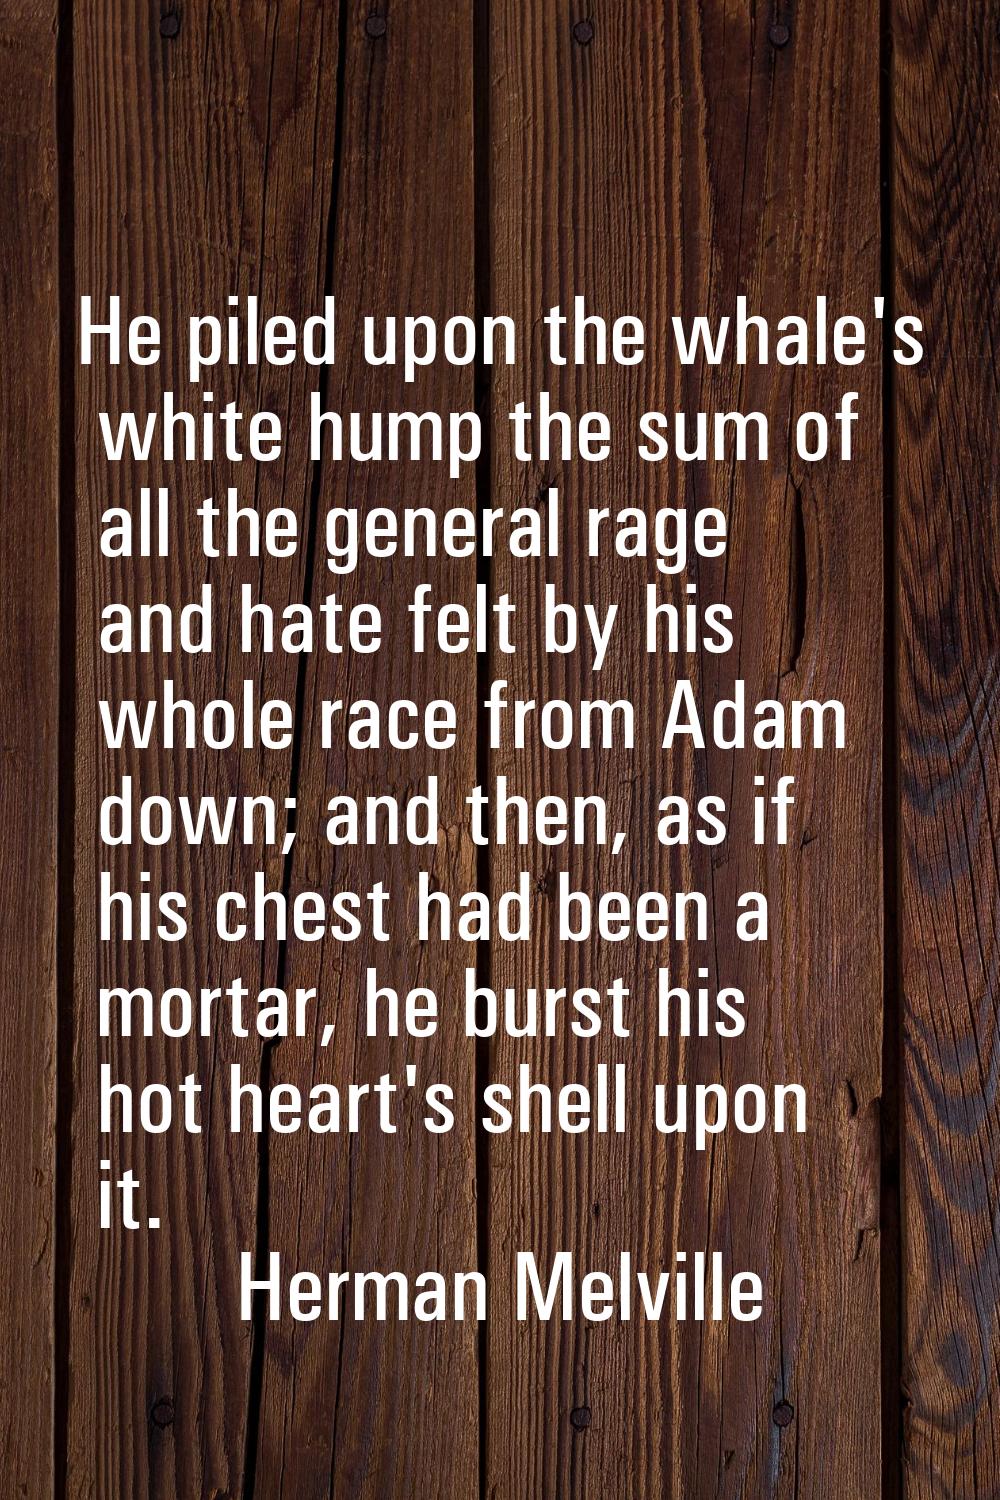 He piled upon the whale's white hump the sum of all the general rage and hate felt by his whole rac